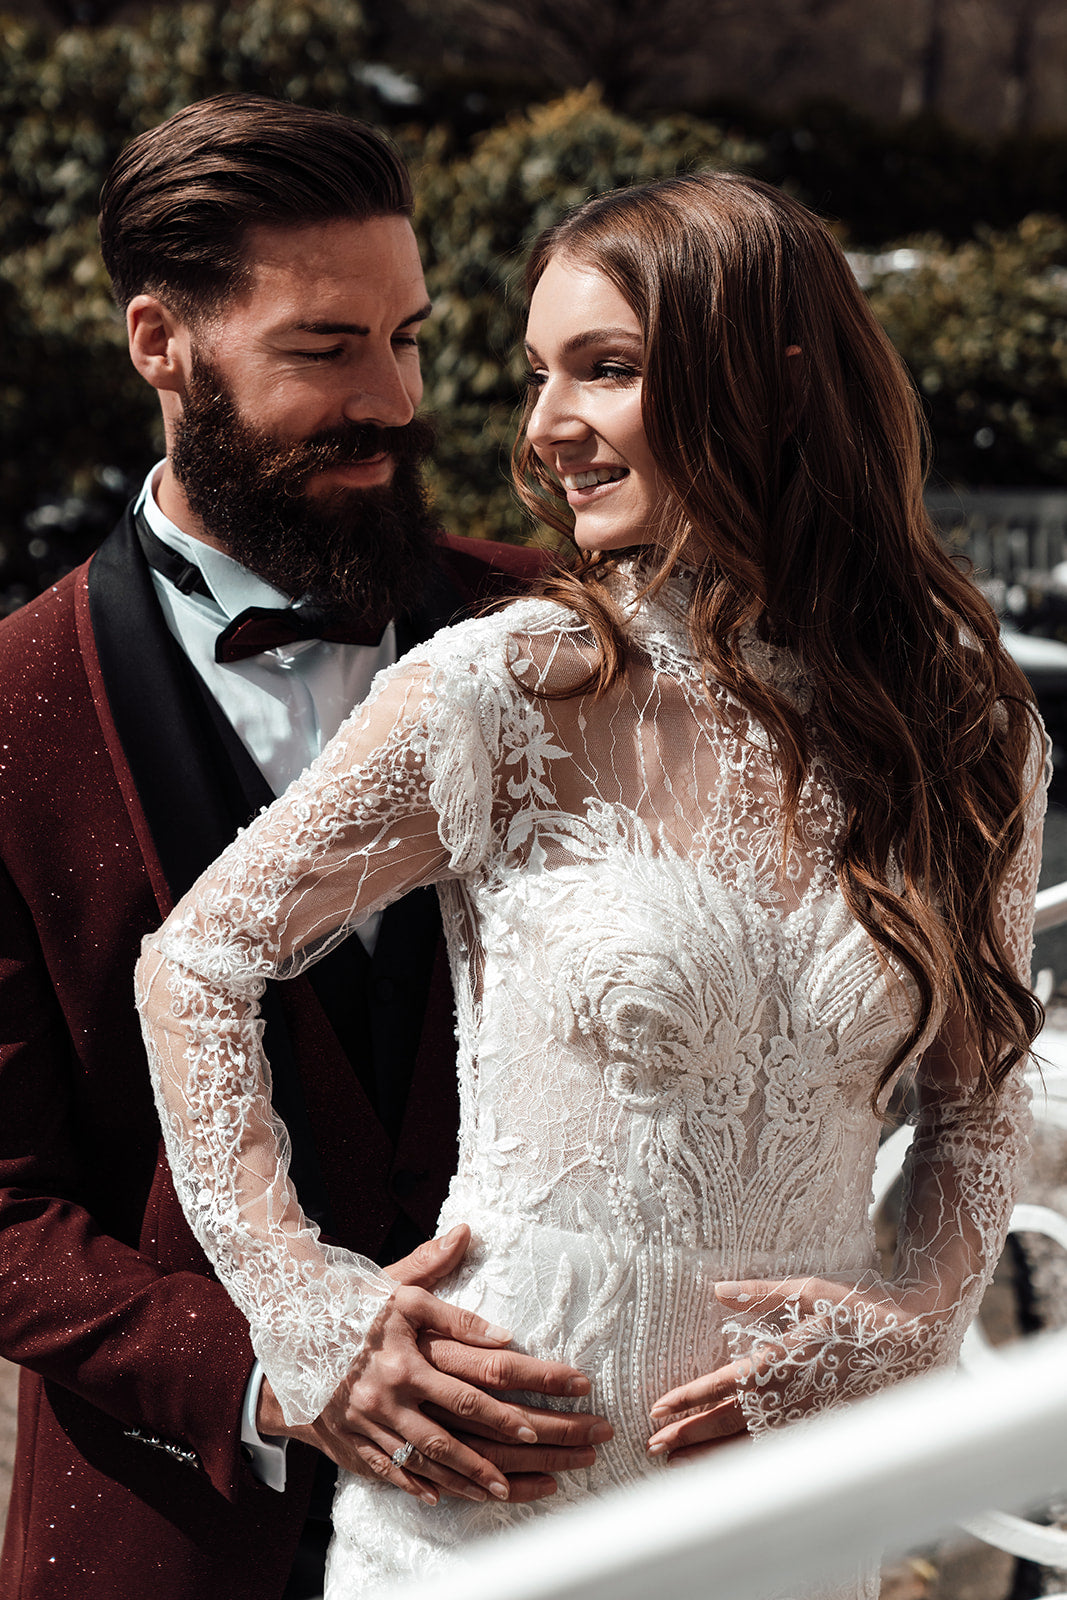 Styled shoot in the Parkvilla Wuppertal